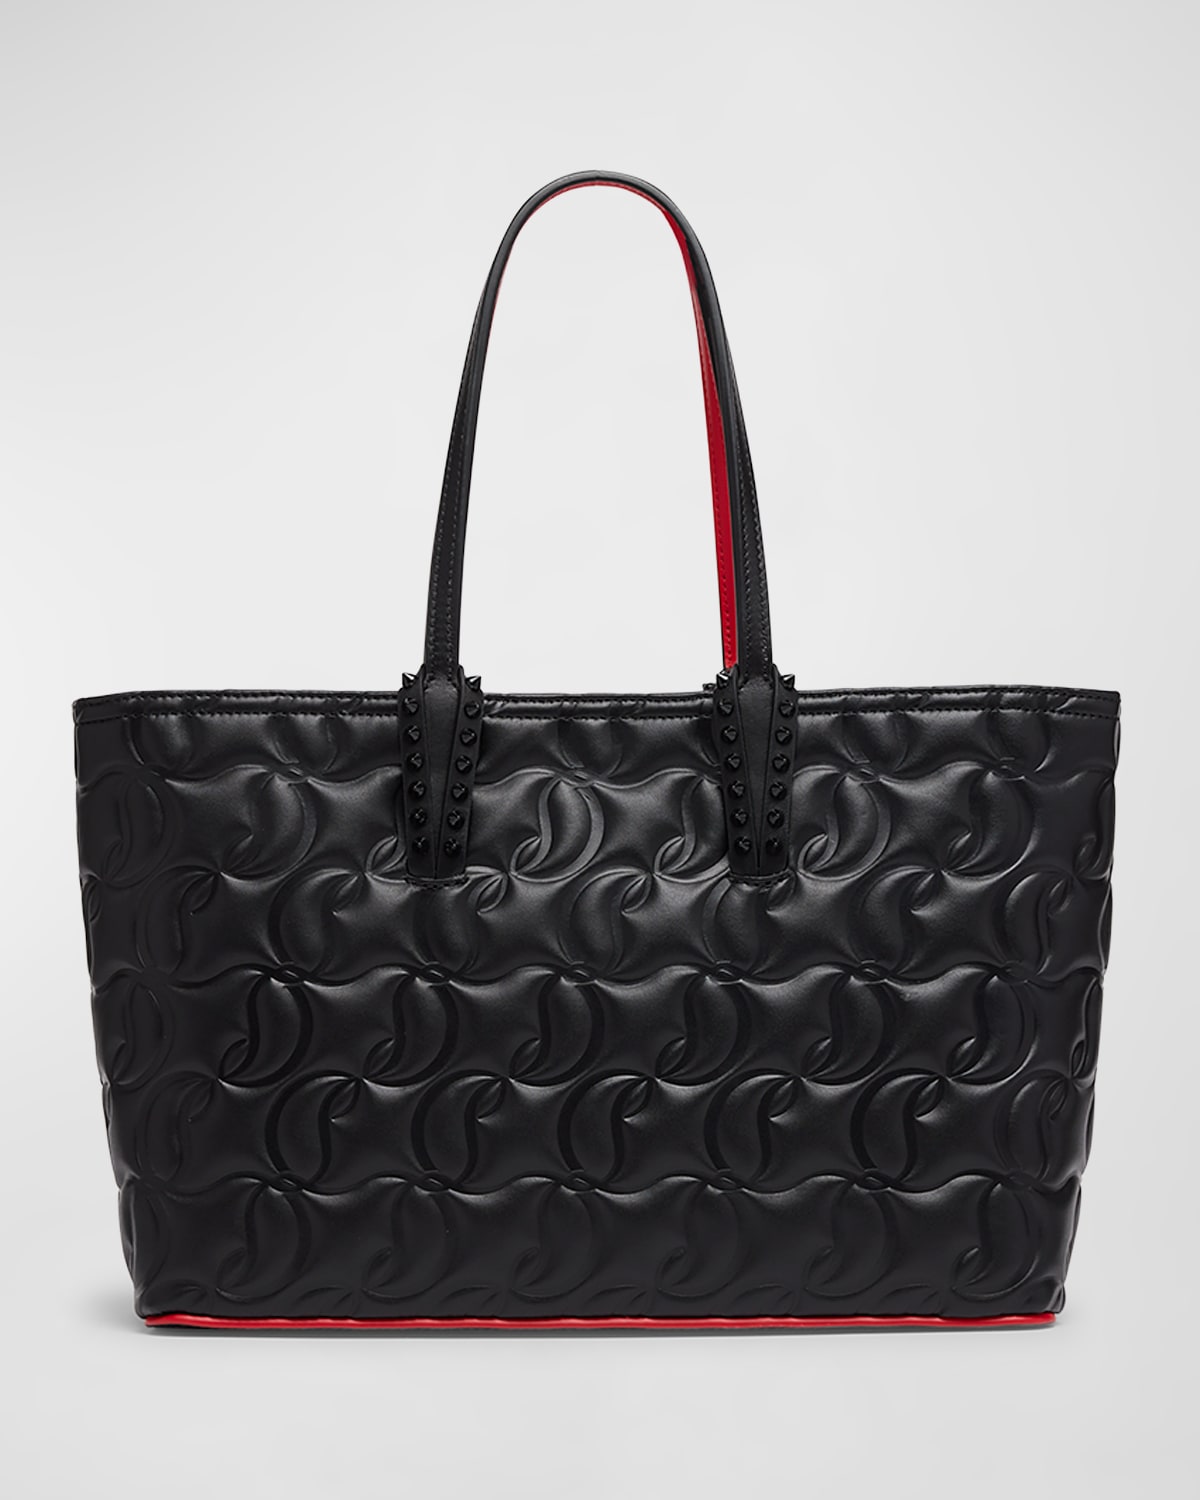 CHRISTIAN LOUBOUTIN CABATA SMALL TOTE IN CL EMBOSSED NAPPA LEATHER